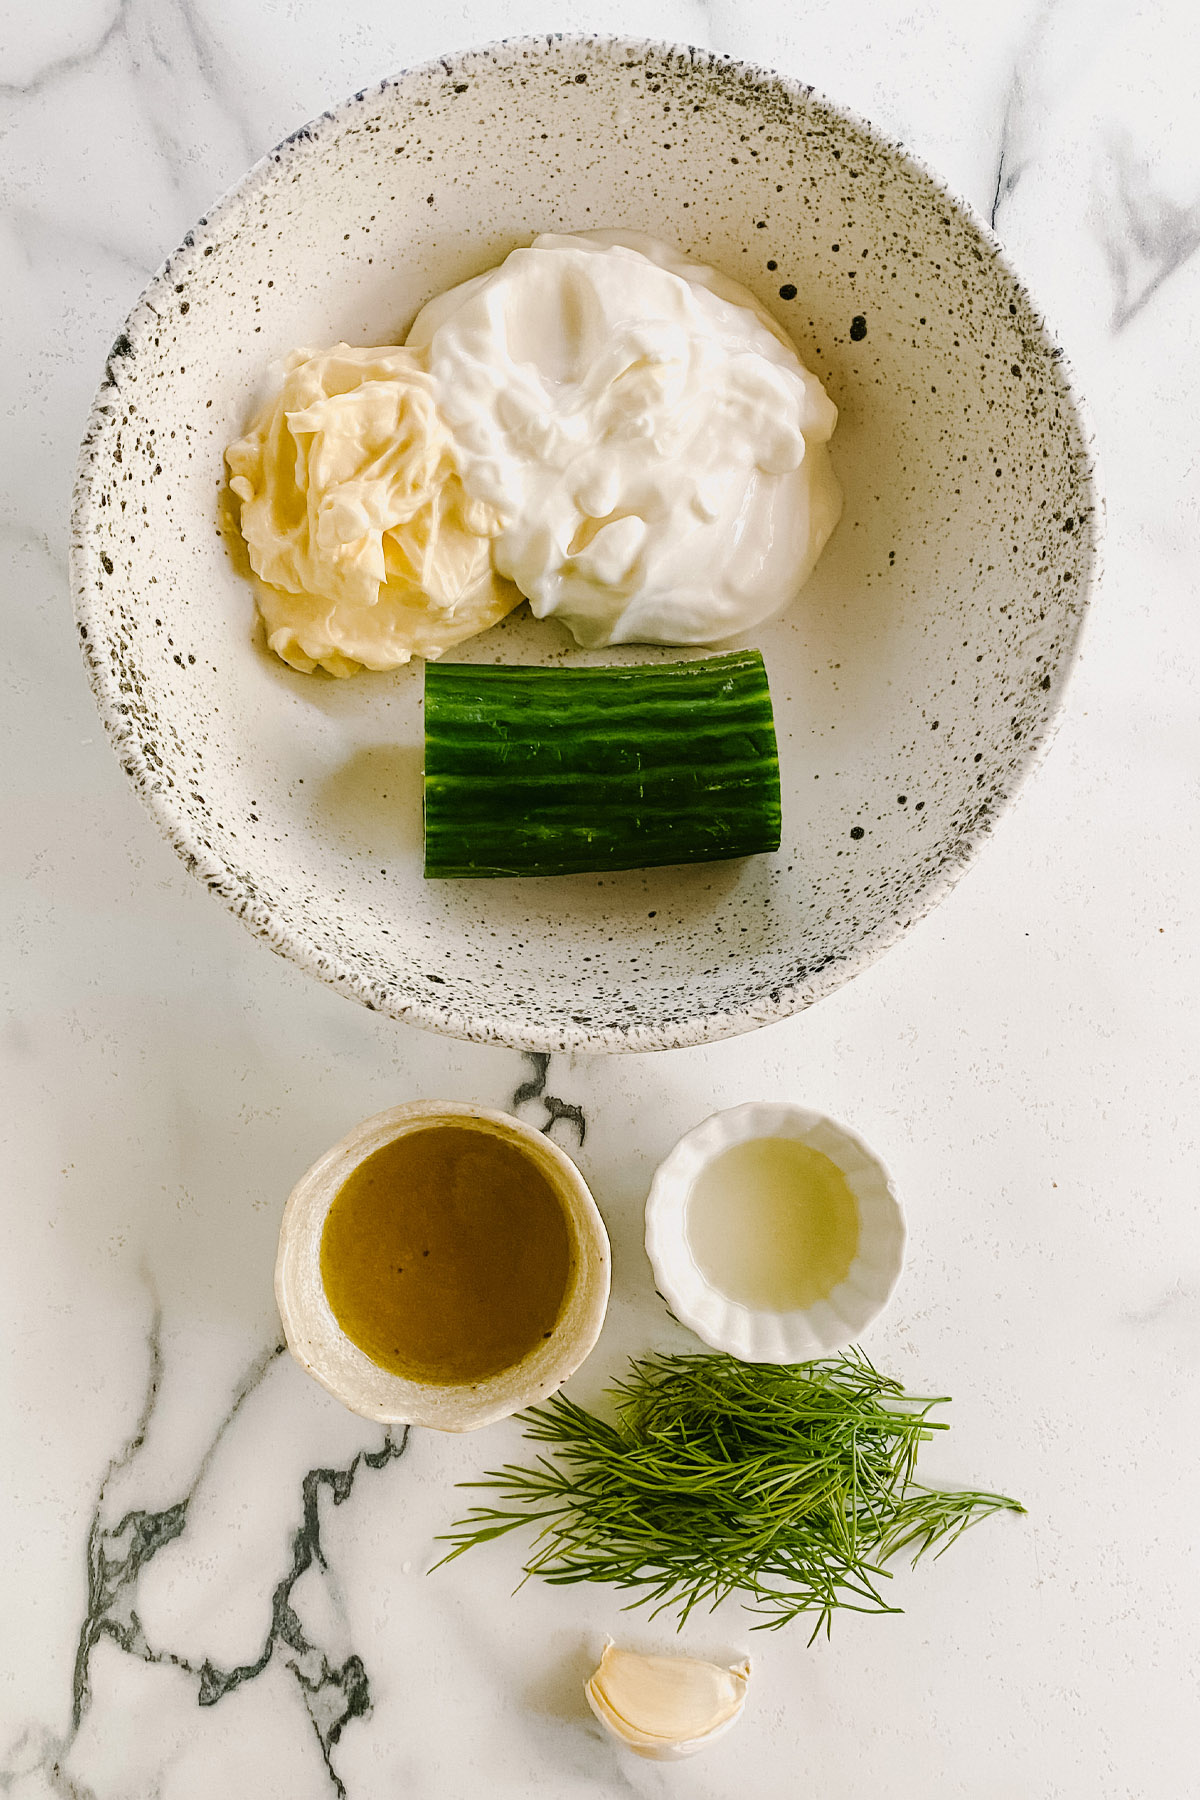 A bowl with mayo, yogurt, cucumber, a bowl with oil, a bowl with lemon juice, and dill and a clove of garlic on a white marble counter.